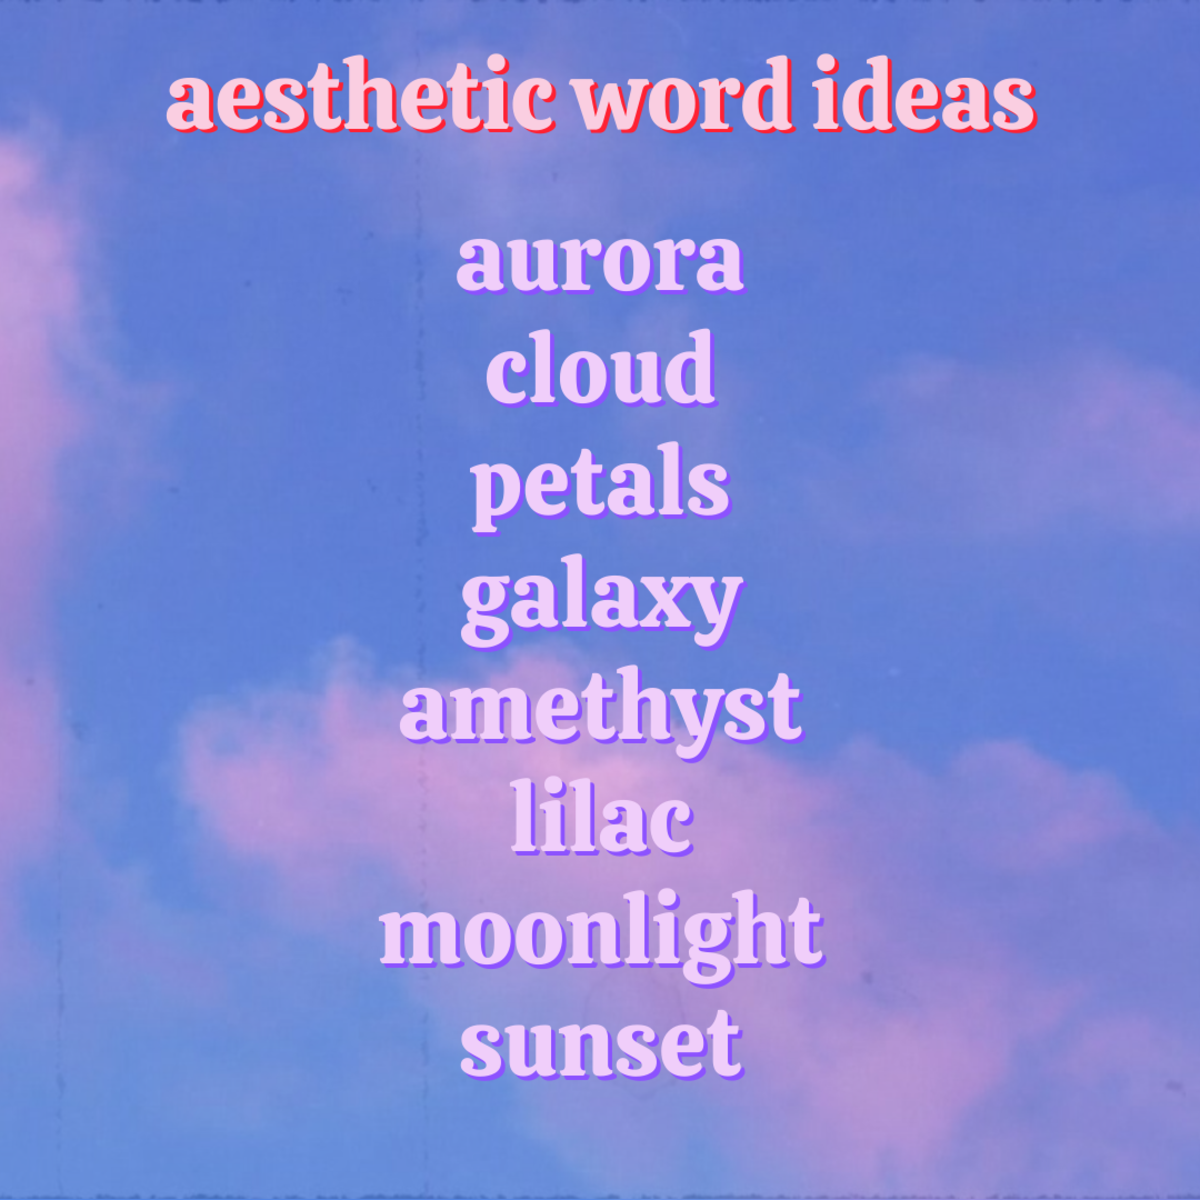 Here are some more aesthetic word ideas, perfect for creating new Roblox usernames!